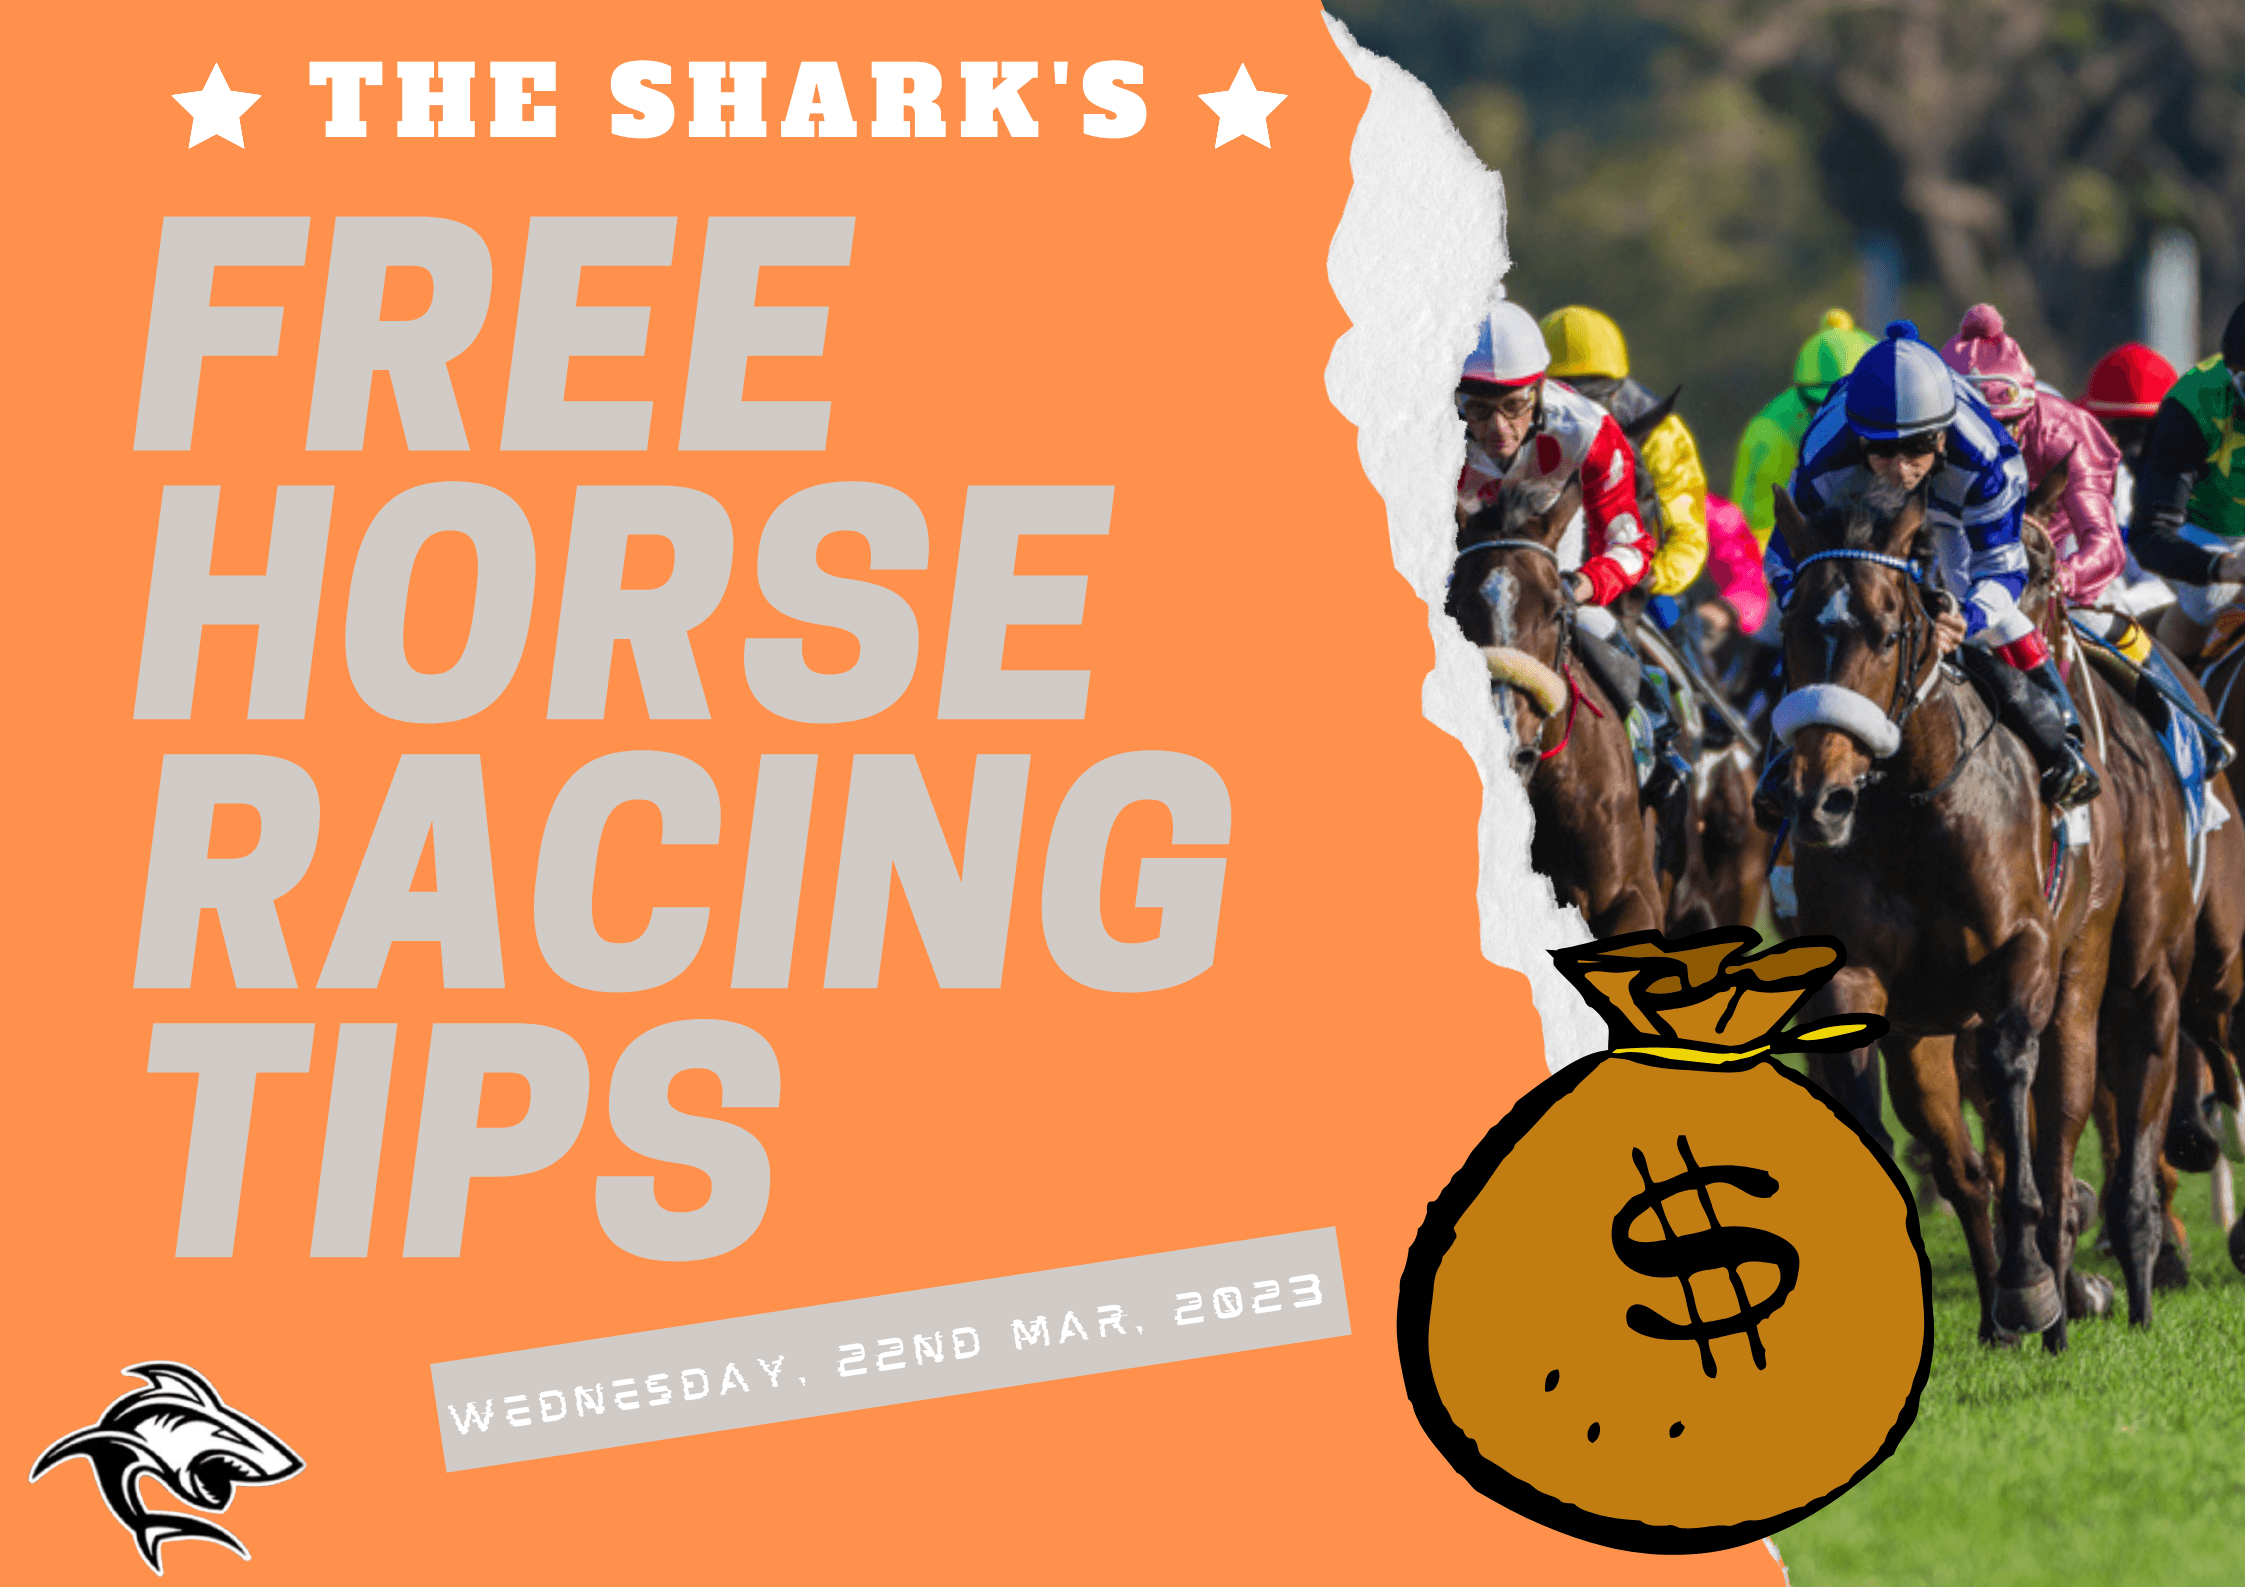 Free Horse Racing Tips - 22nd Mar